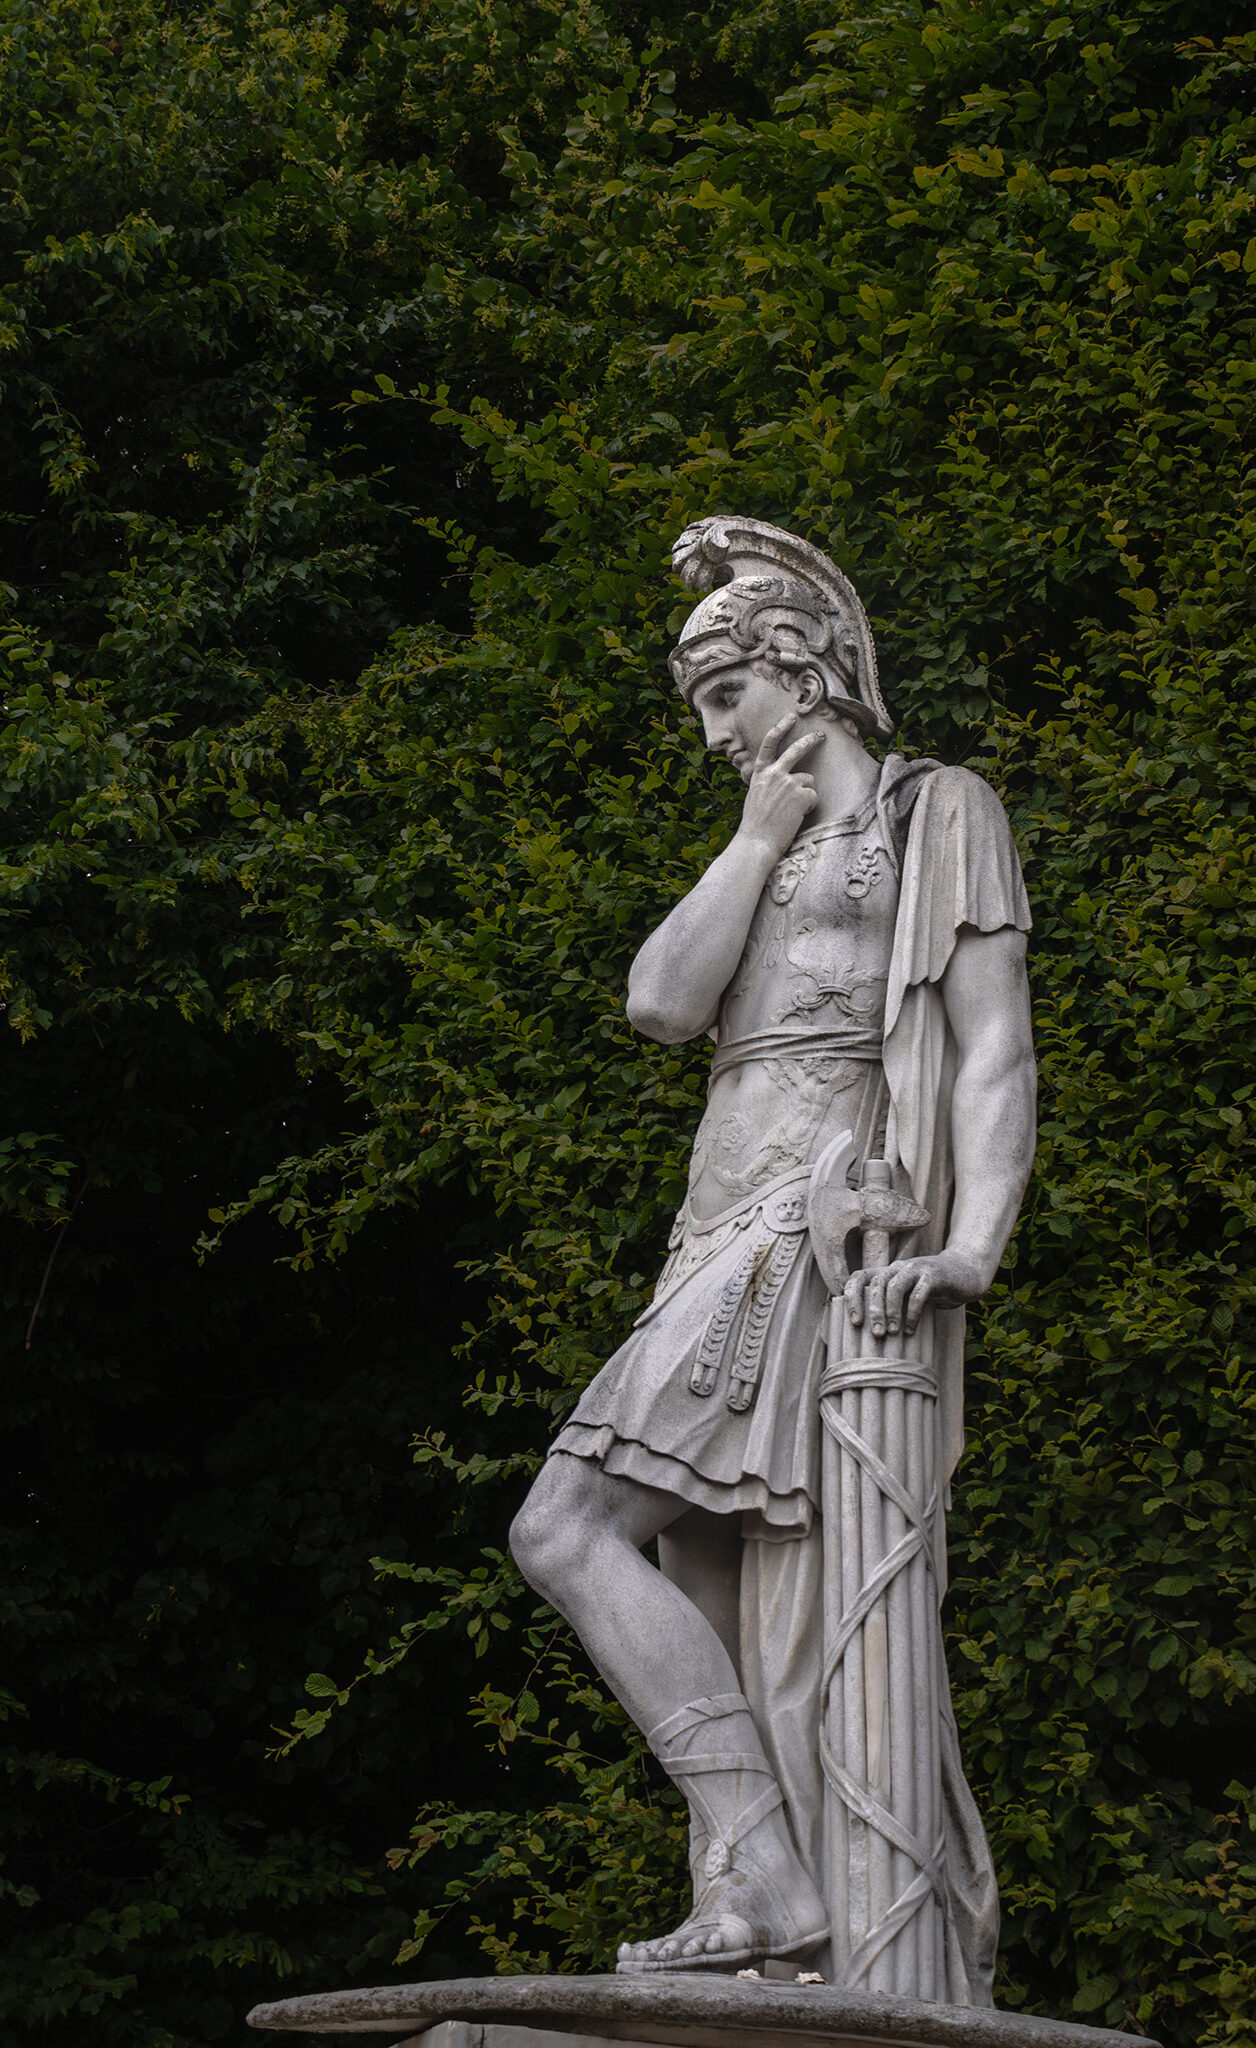 A grey statue stands pondering on a backdrop of greenery.